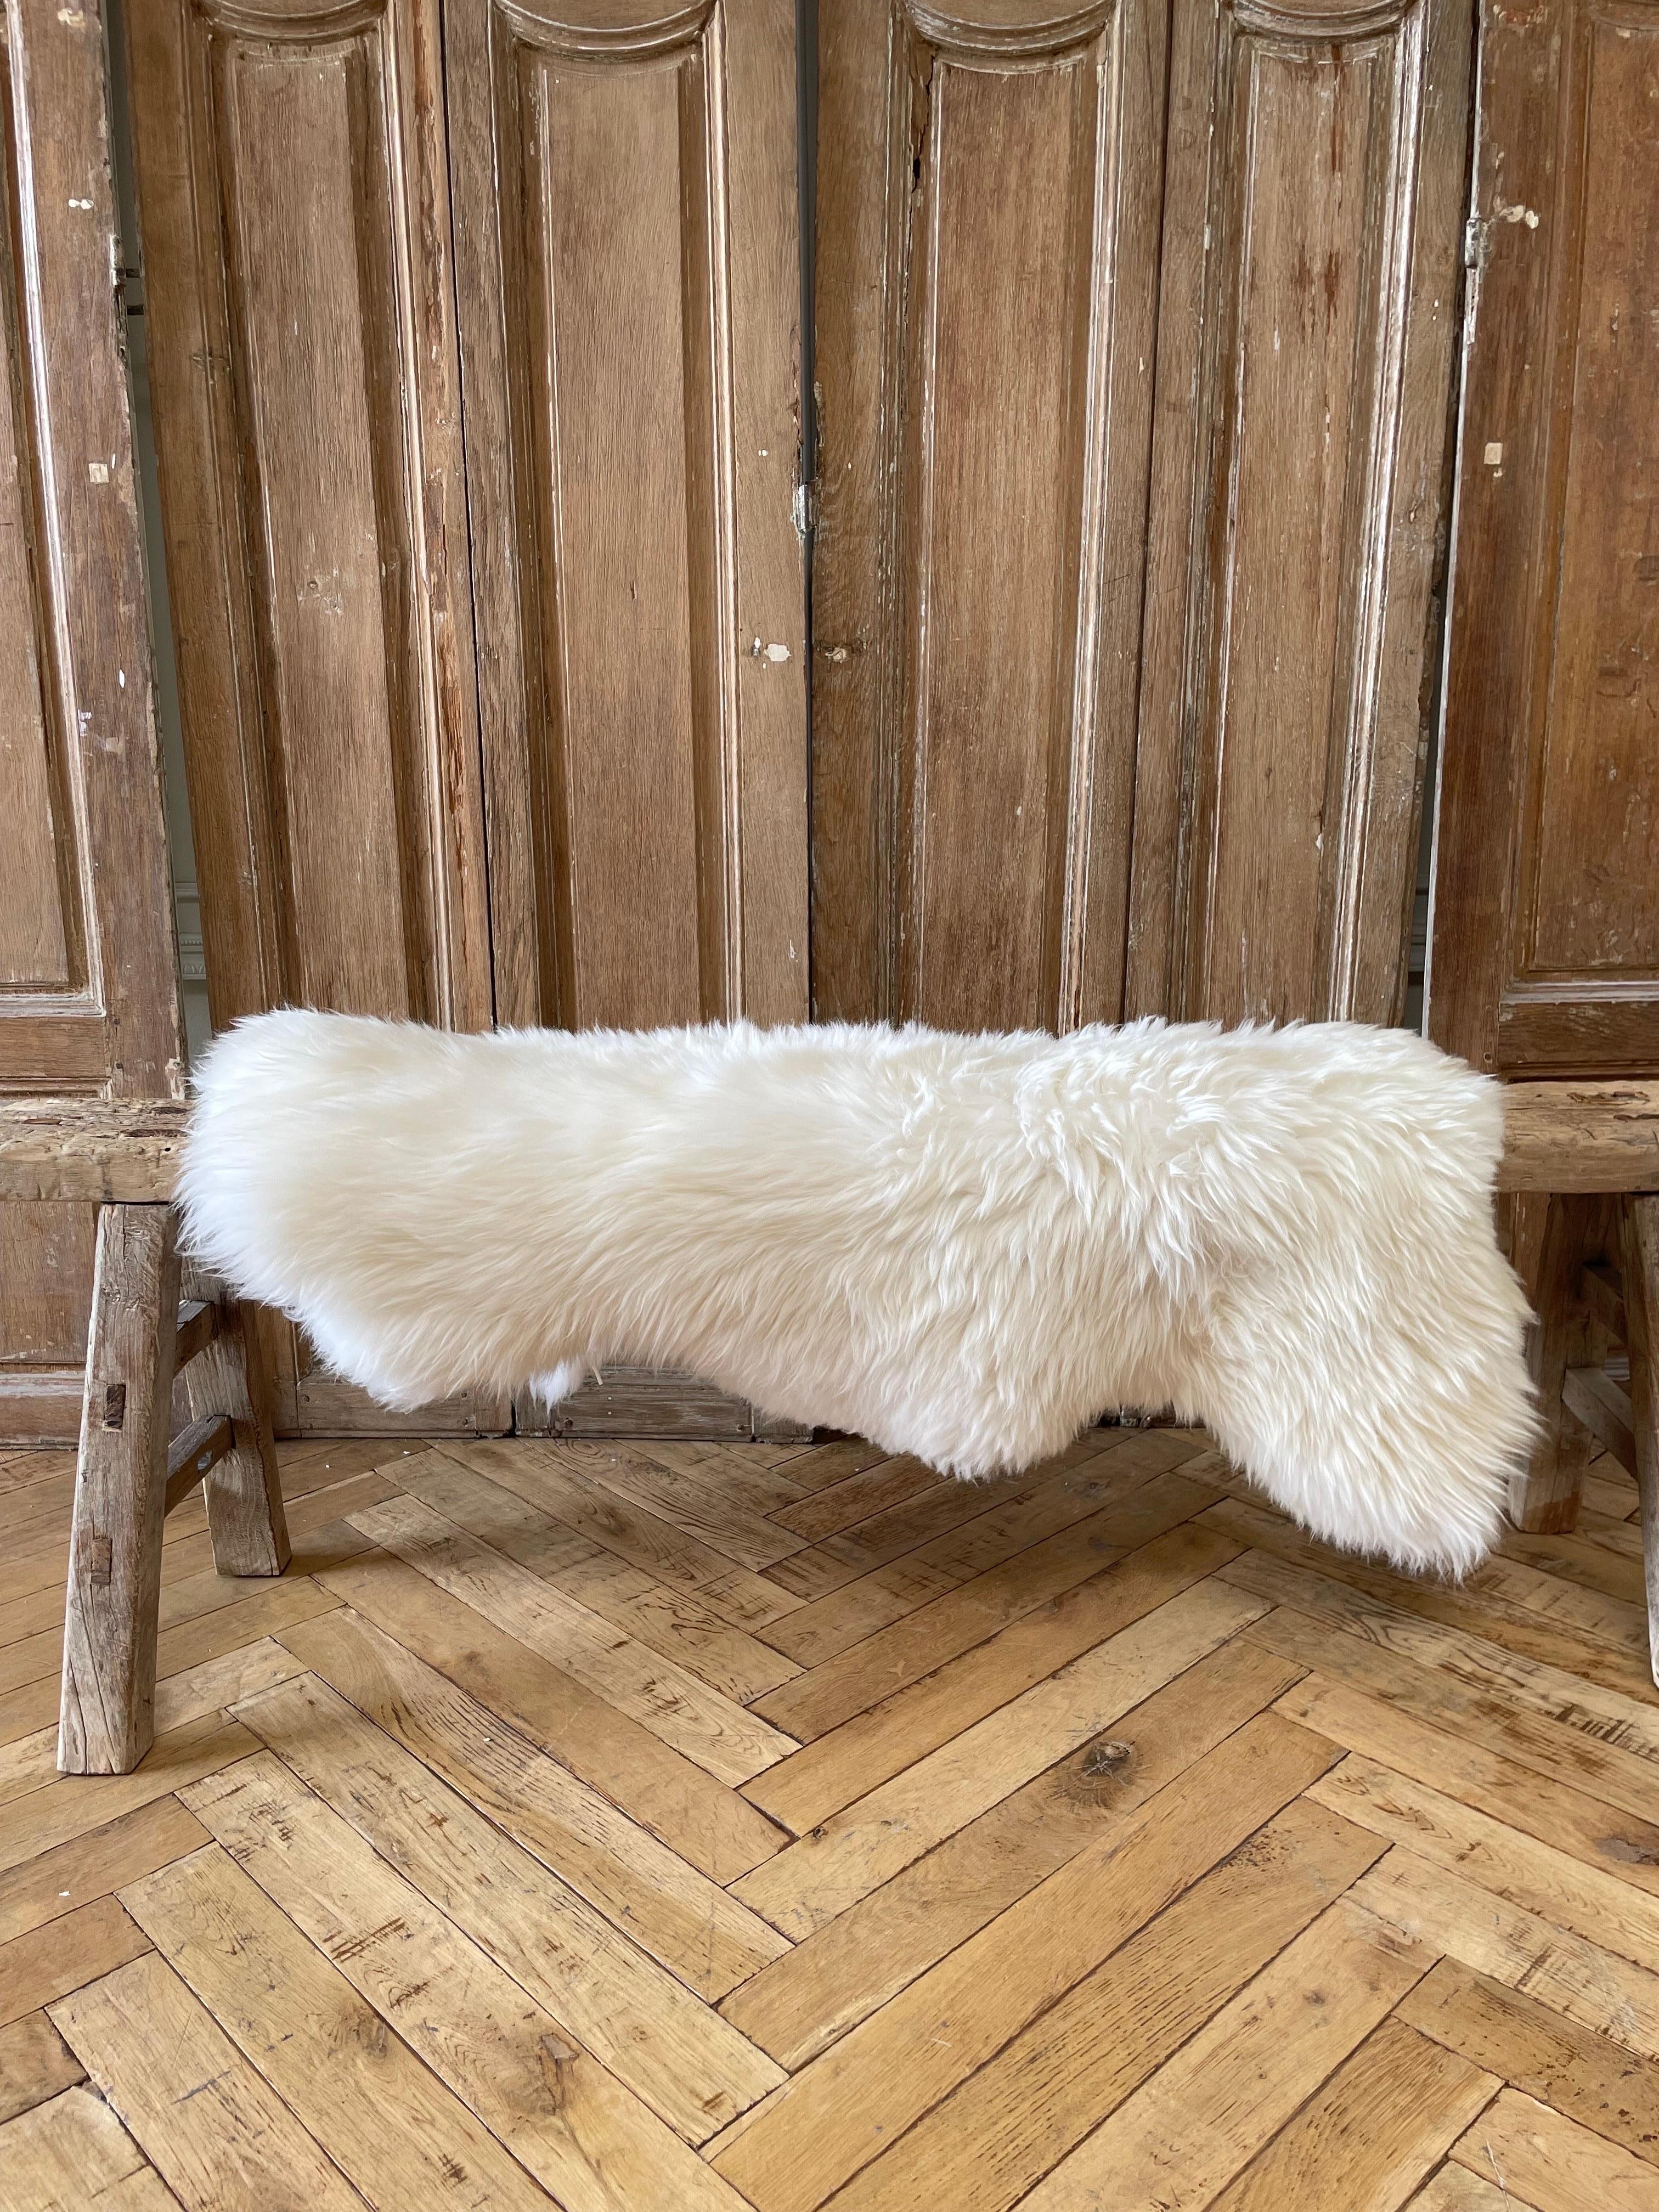 Natural Creamy white sheepskin
Long hair, use over a bench or as a rug.
Extremely soft to the touch. Dry Cleam. 
Origin: Paris France
Size: 40” x 32” / 27”
Center to center skin 36” x 25”.